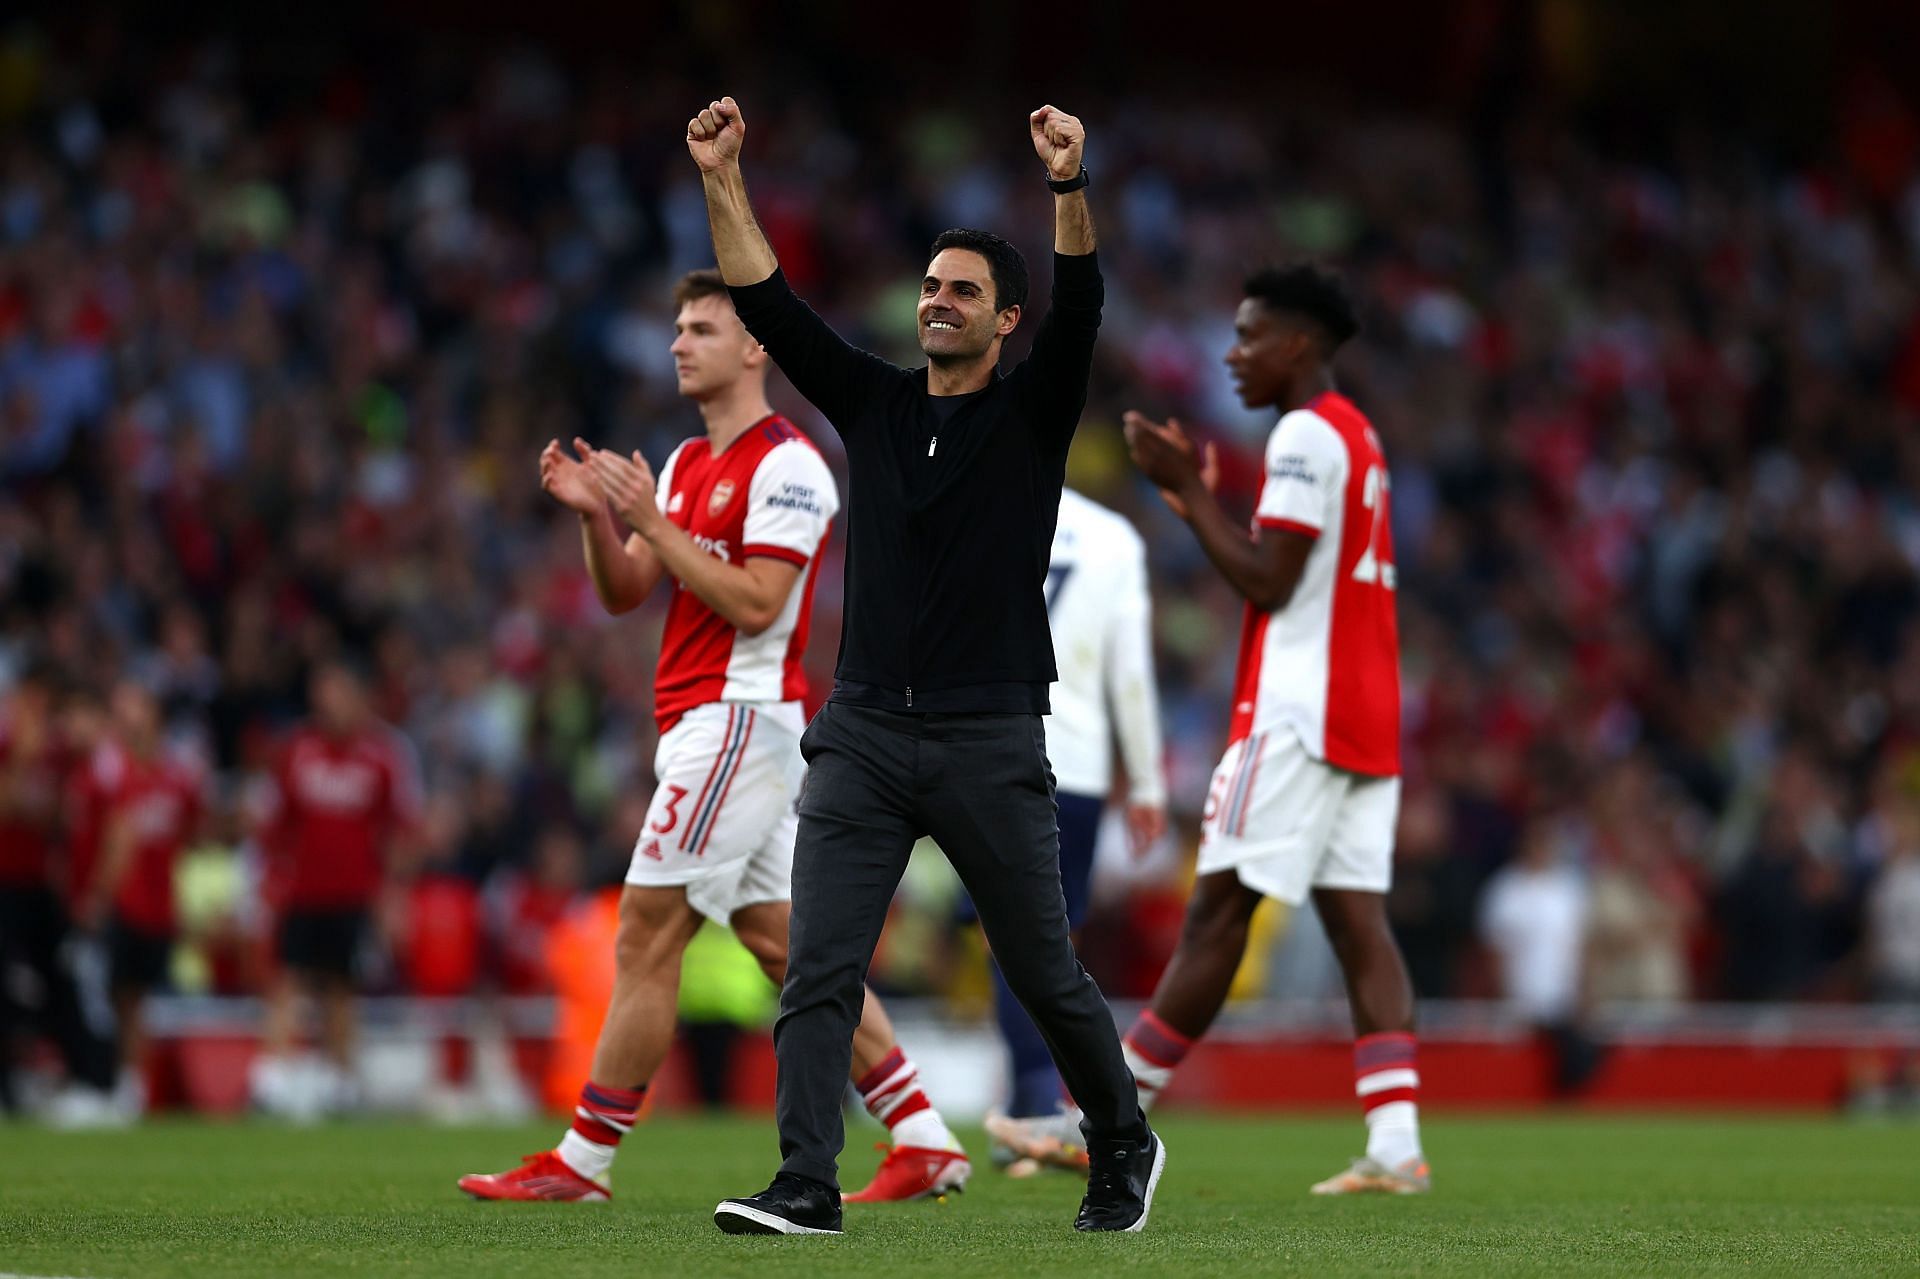 Arsenal manager Mikel Arteta secured an impressive win over Leicester City